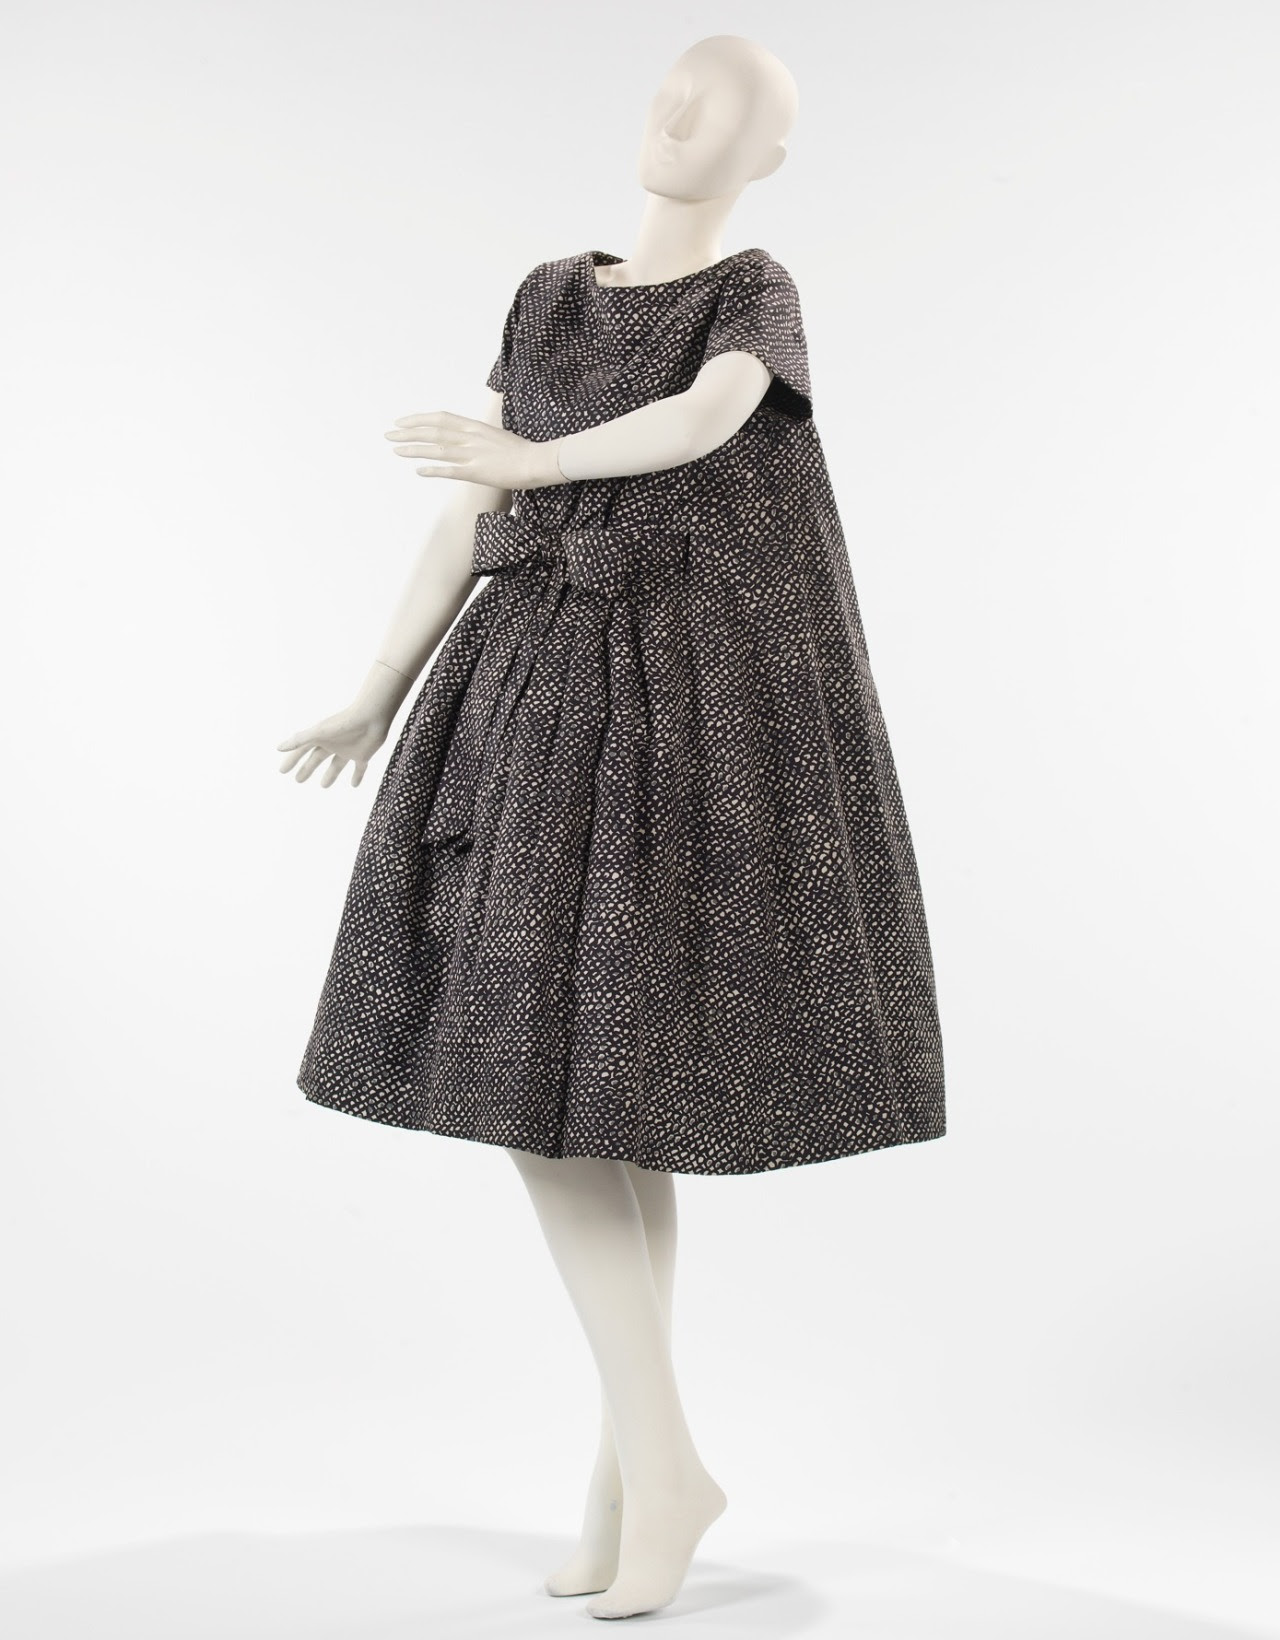 fashiongallery: Costumes In History-20TH Century